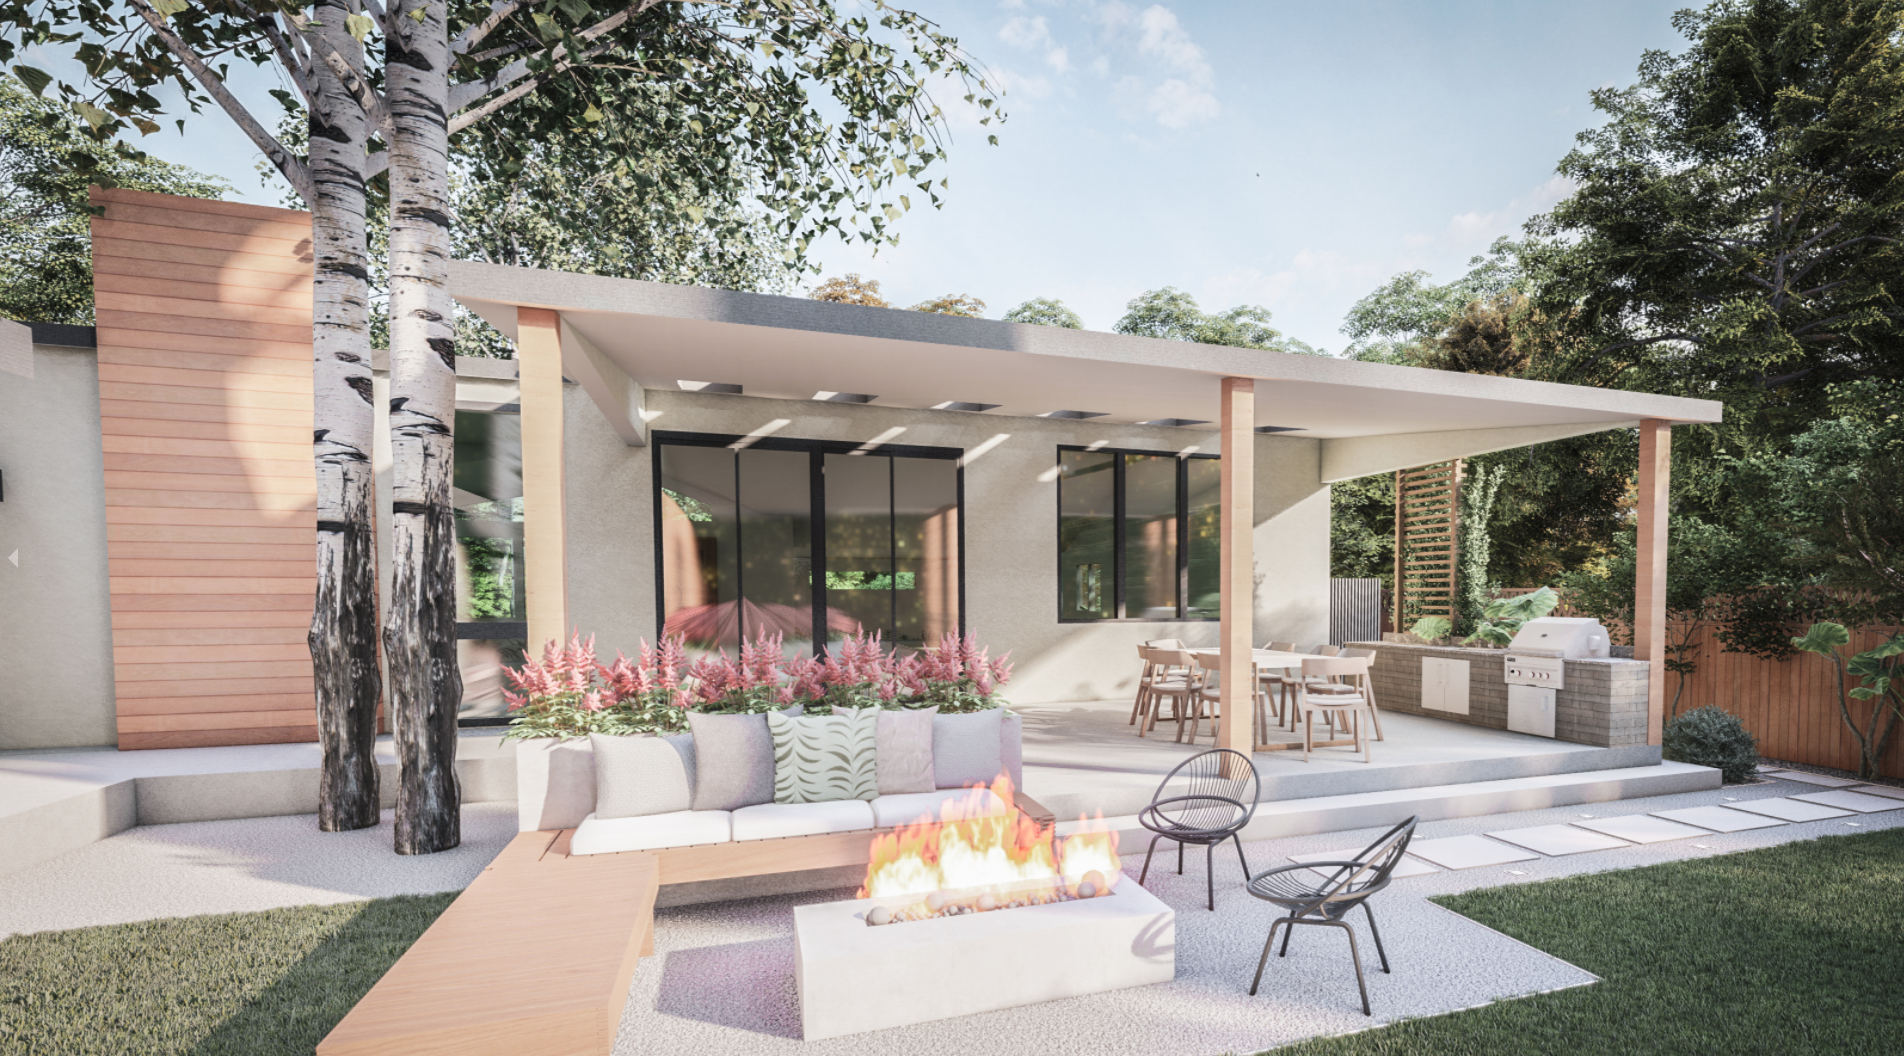 Modern backyard with pergola and built in seating around fire pit